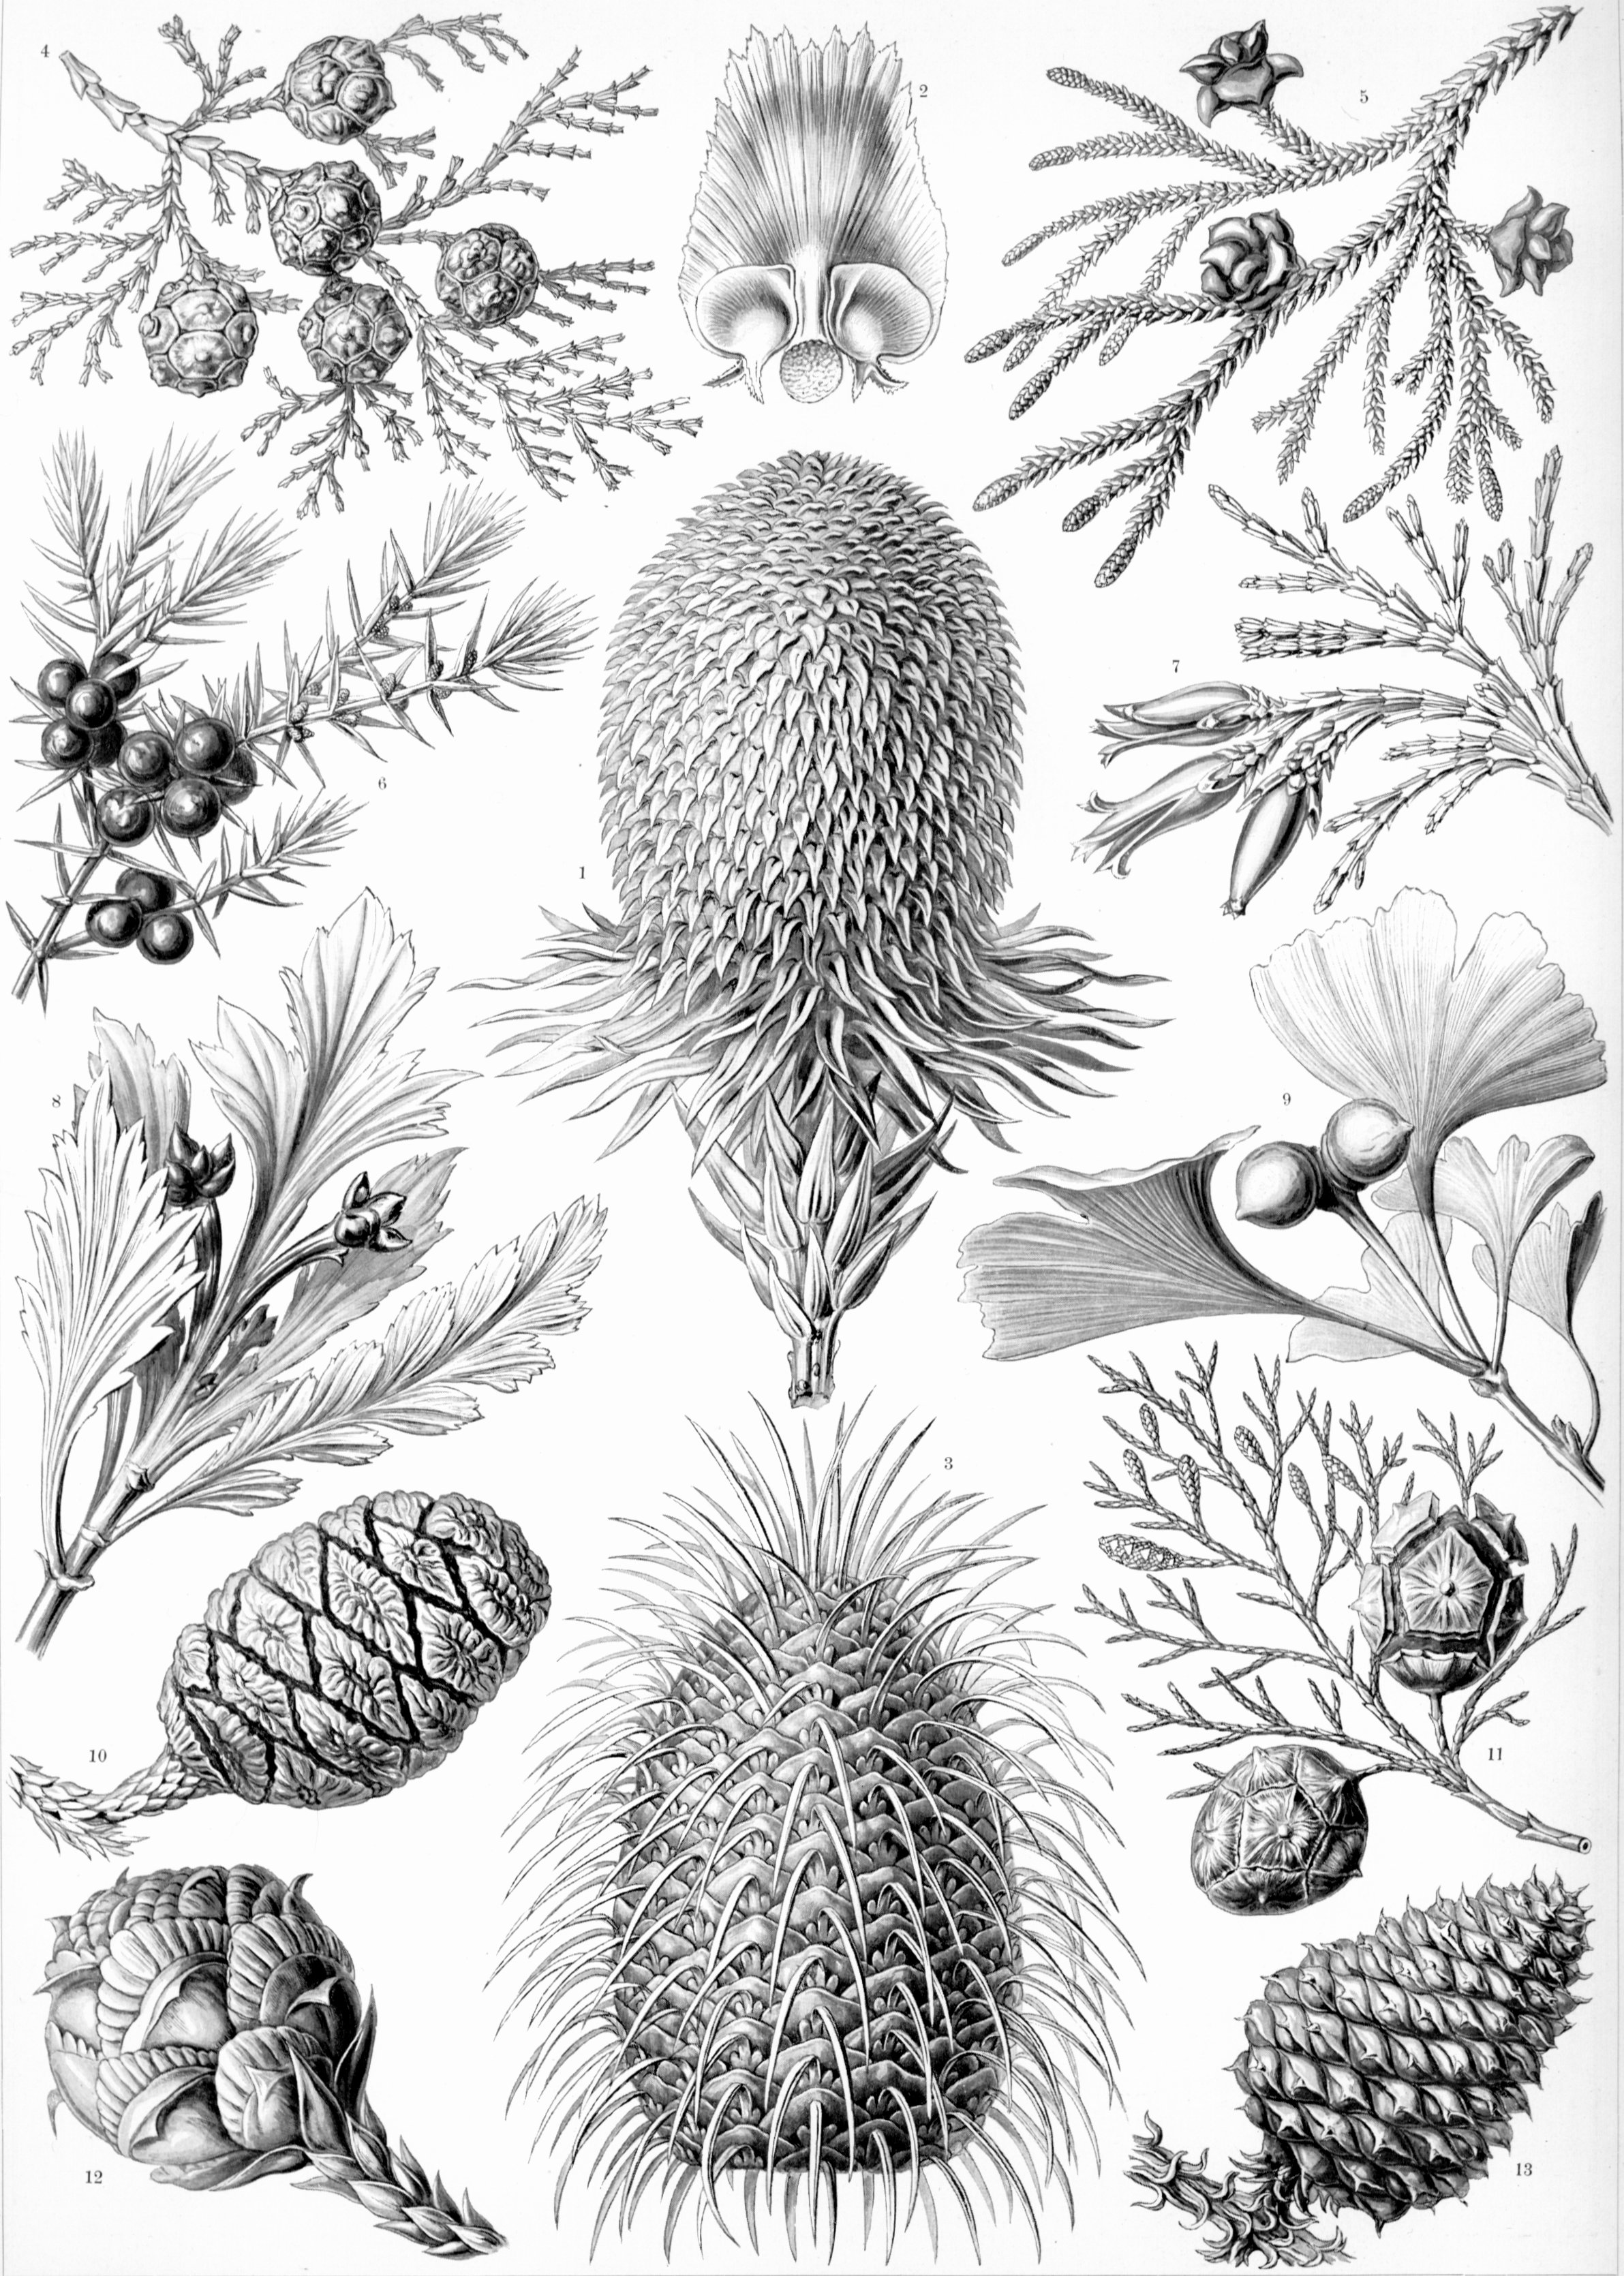 Pine cones. Kunstformen der Natur; select images. Scan of 2 d images in the public domain believed to be free to use without restriction in the US.